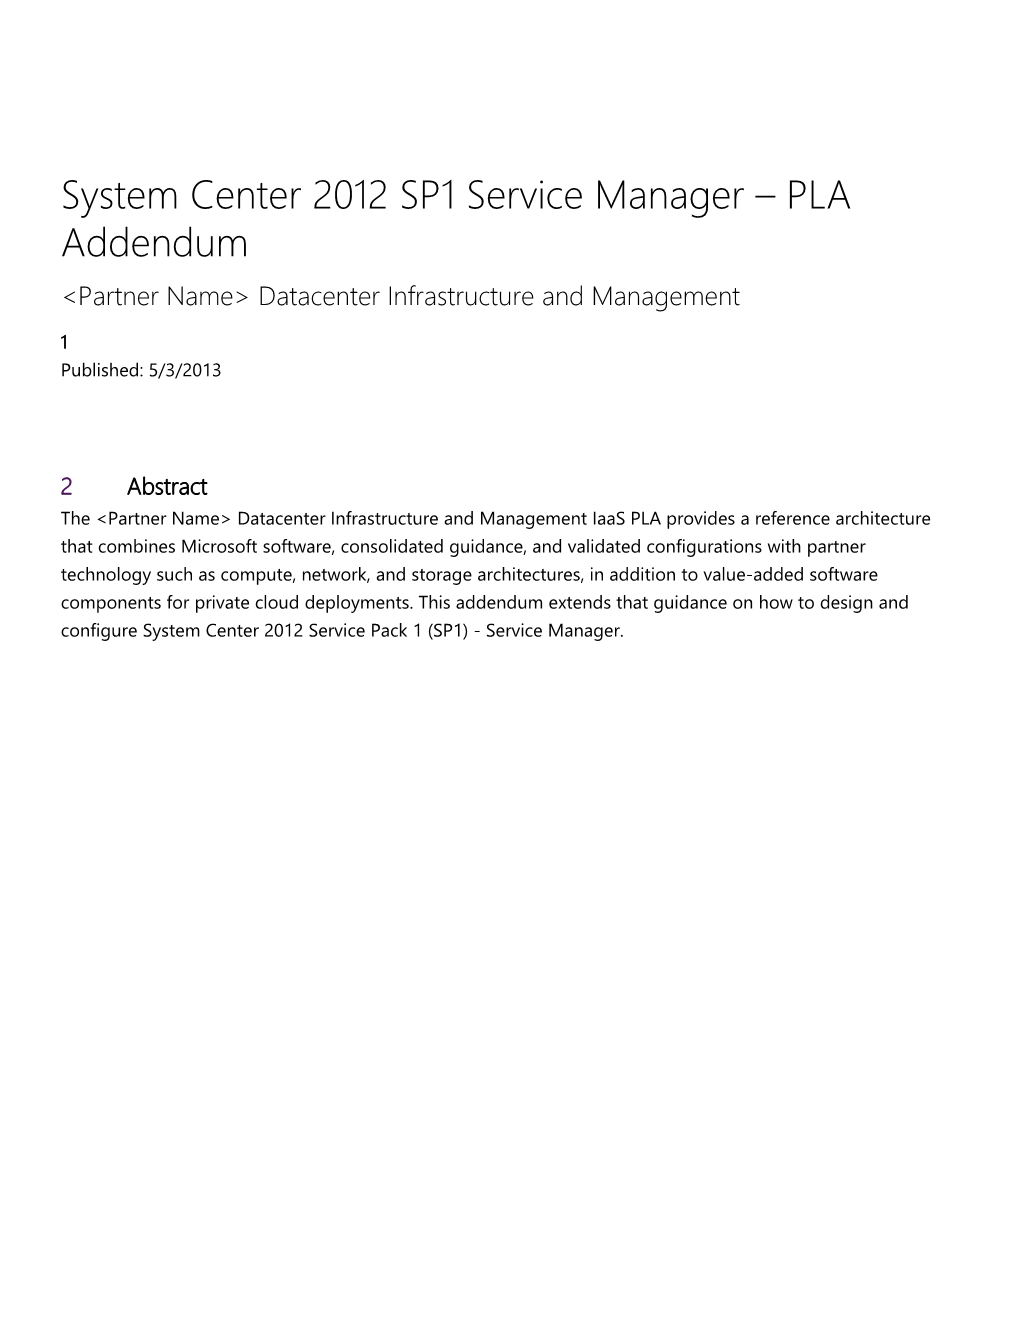 Operations Manager 2012 SP1 Architecture & Design Guide